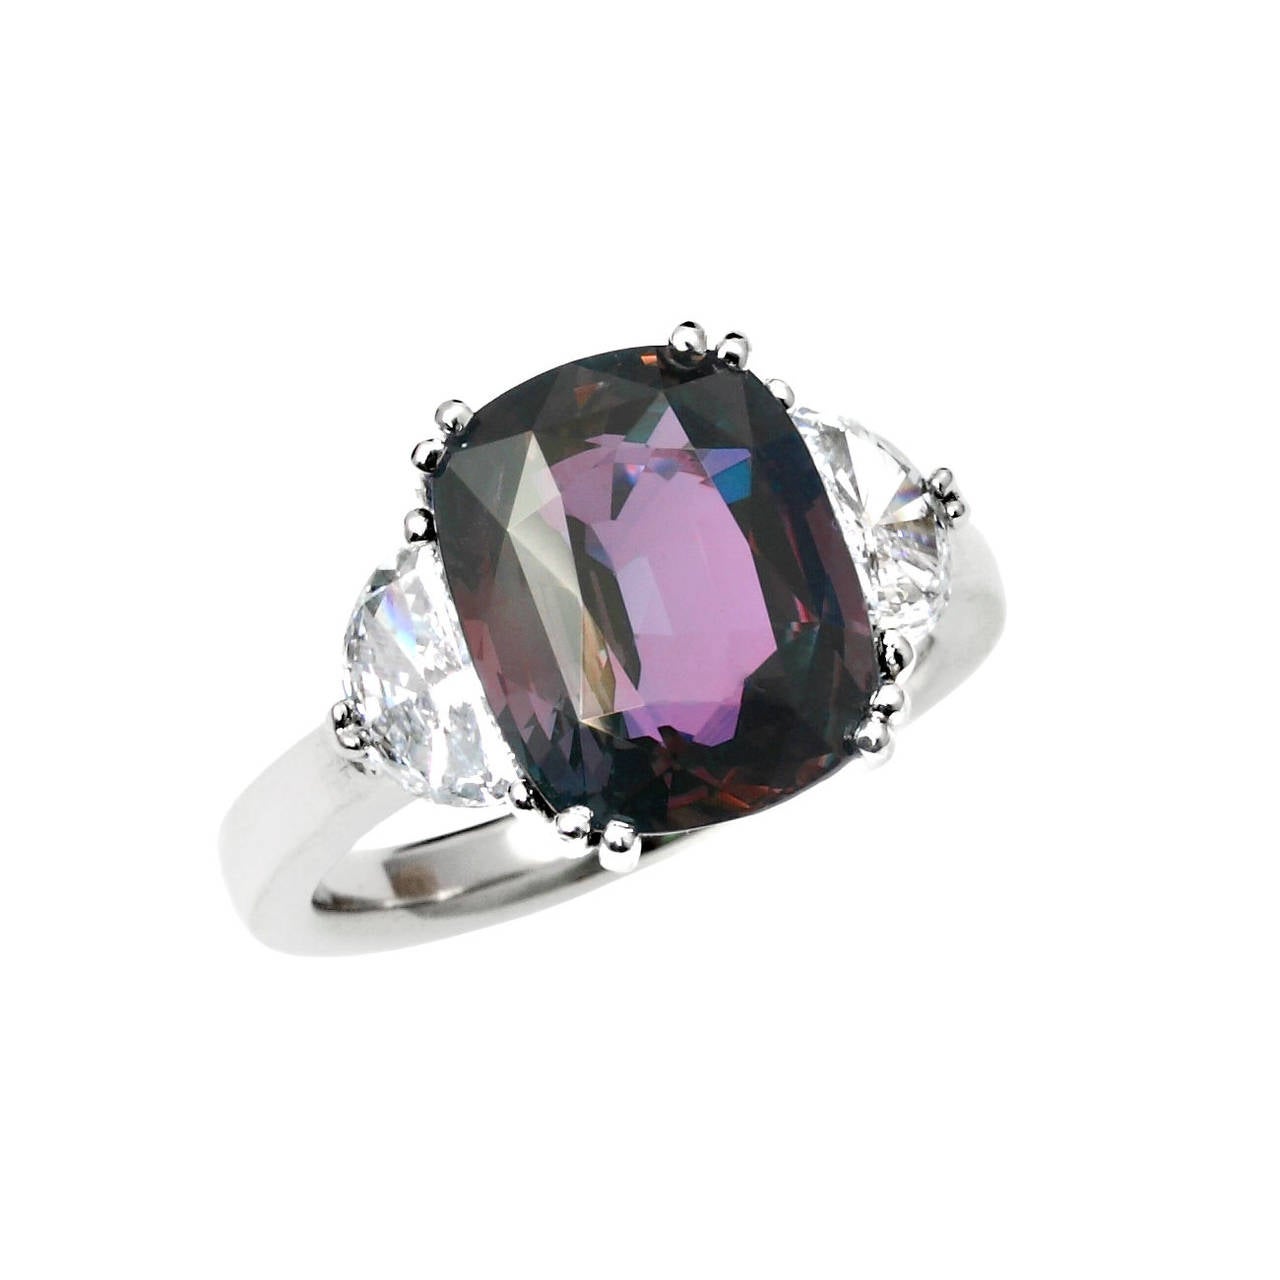 A beautiful and classic three stone ring set with a 7 ct+ cushion-shape natural Alexandrite measuring 12.34 x 9.99 x 6.52 mm accented with two brilliant cut half-moon diamonds weighing an estimated total of 0.86 carats, set in Platinum. The